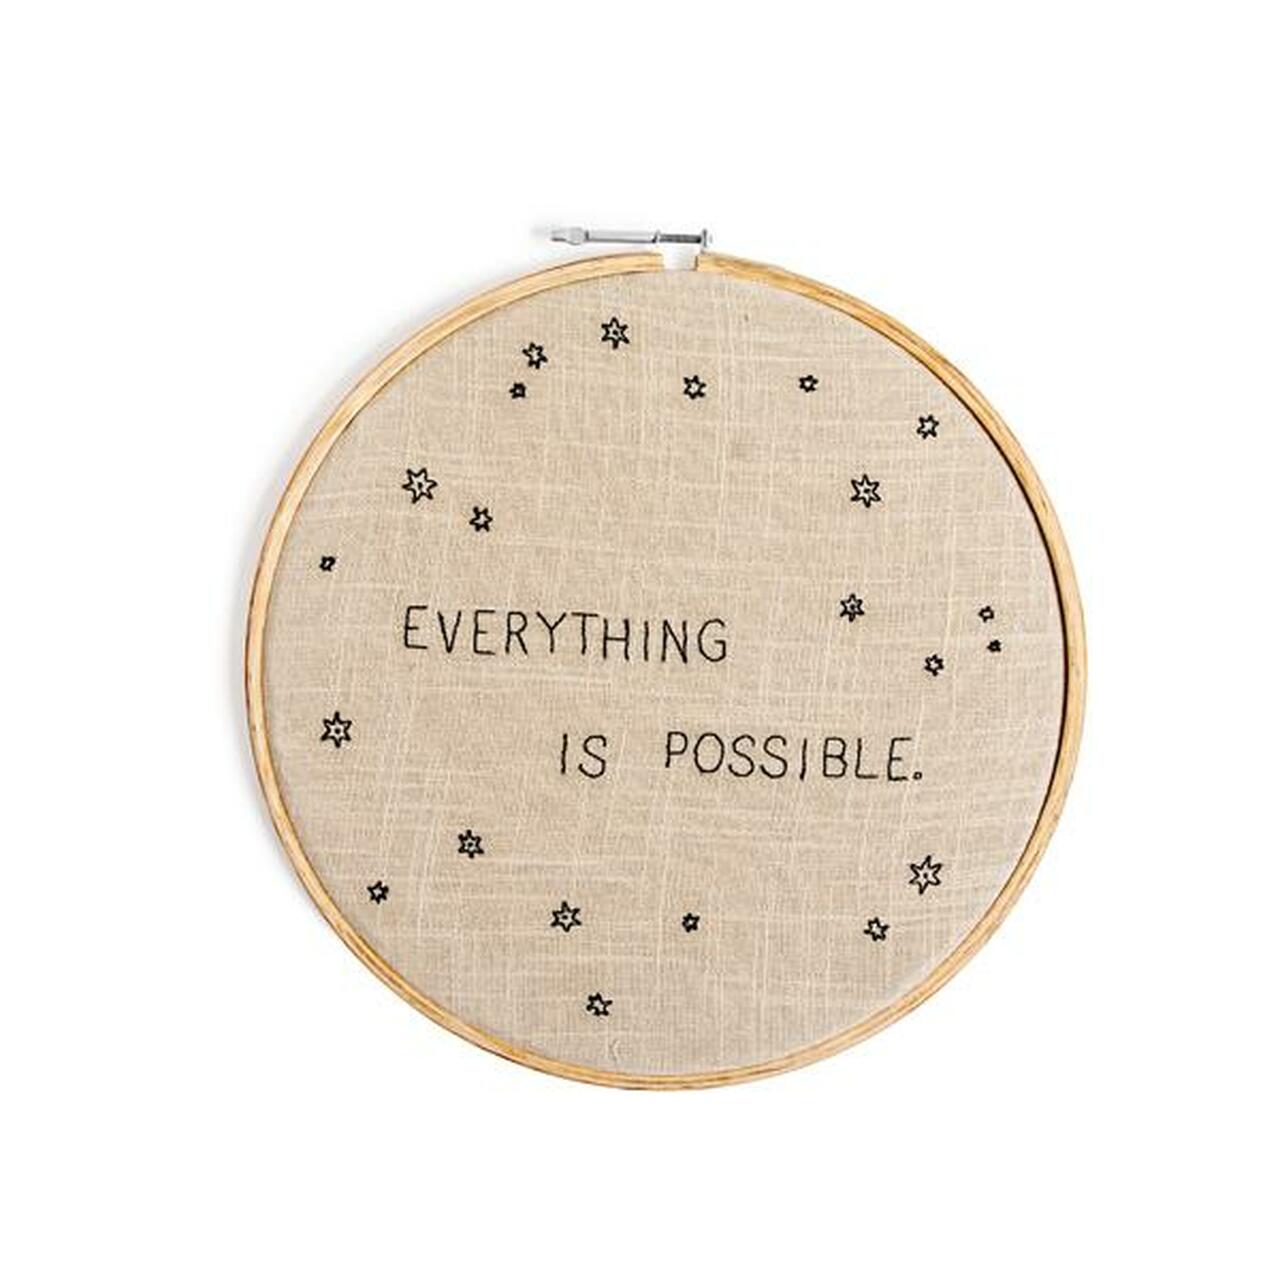 Everything Is Possible - Embroidery Hoop